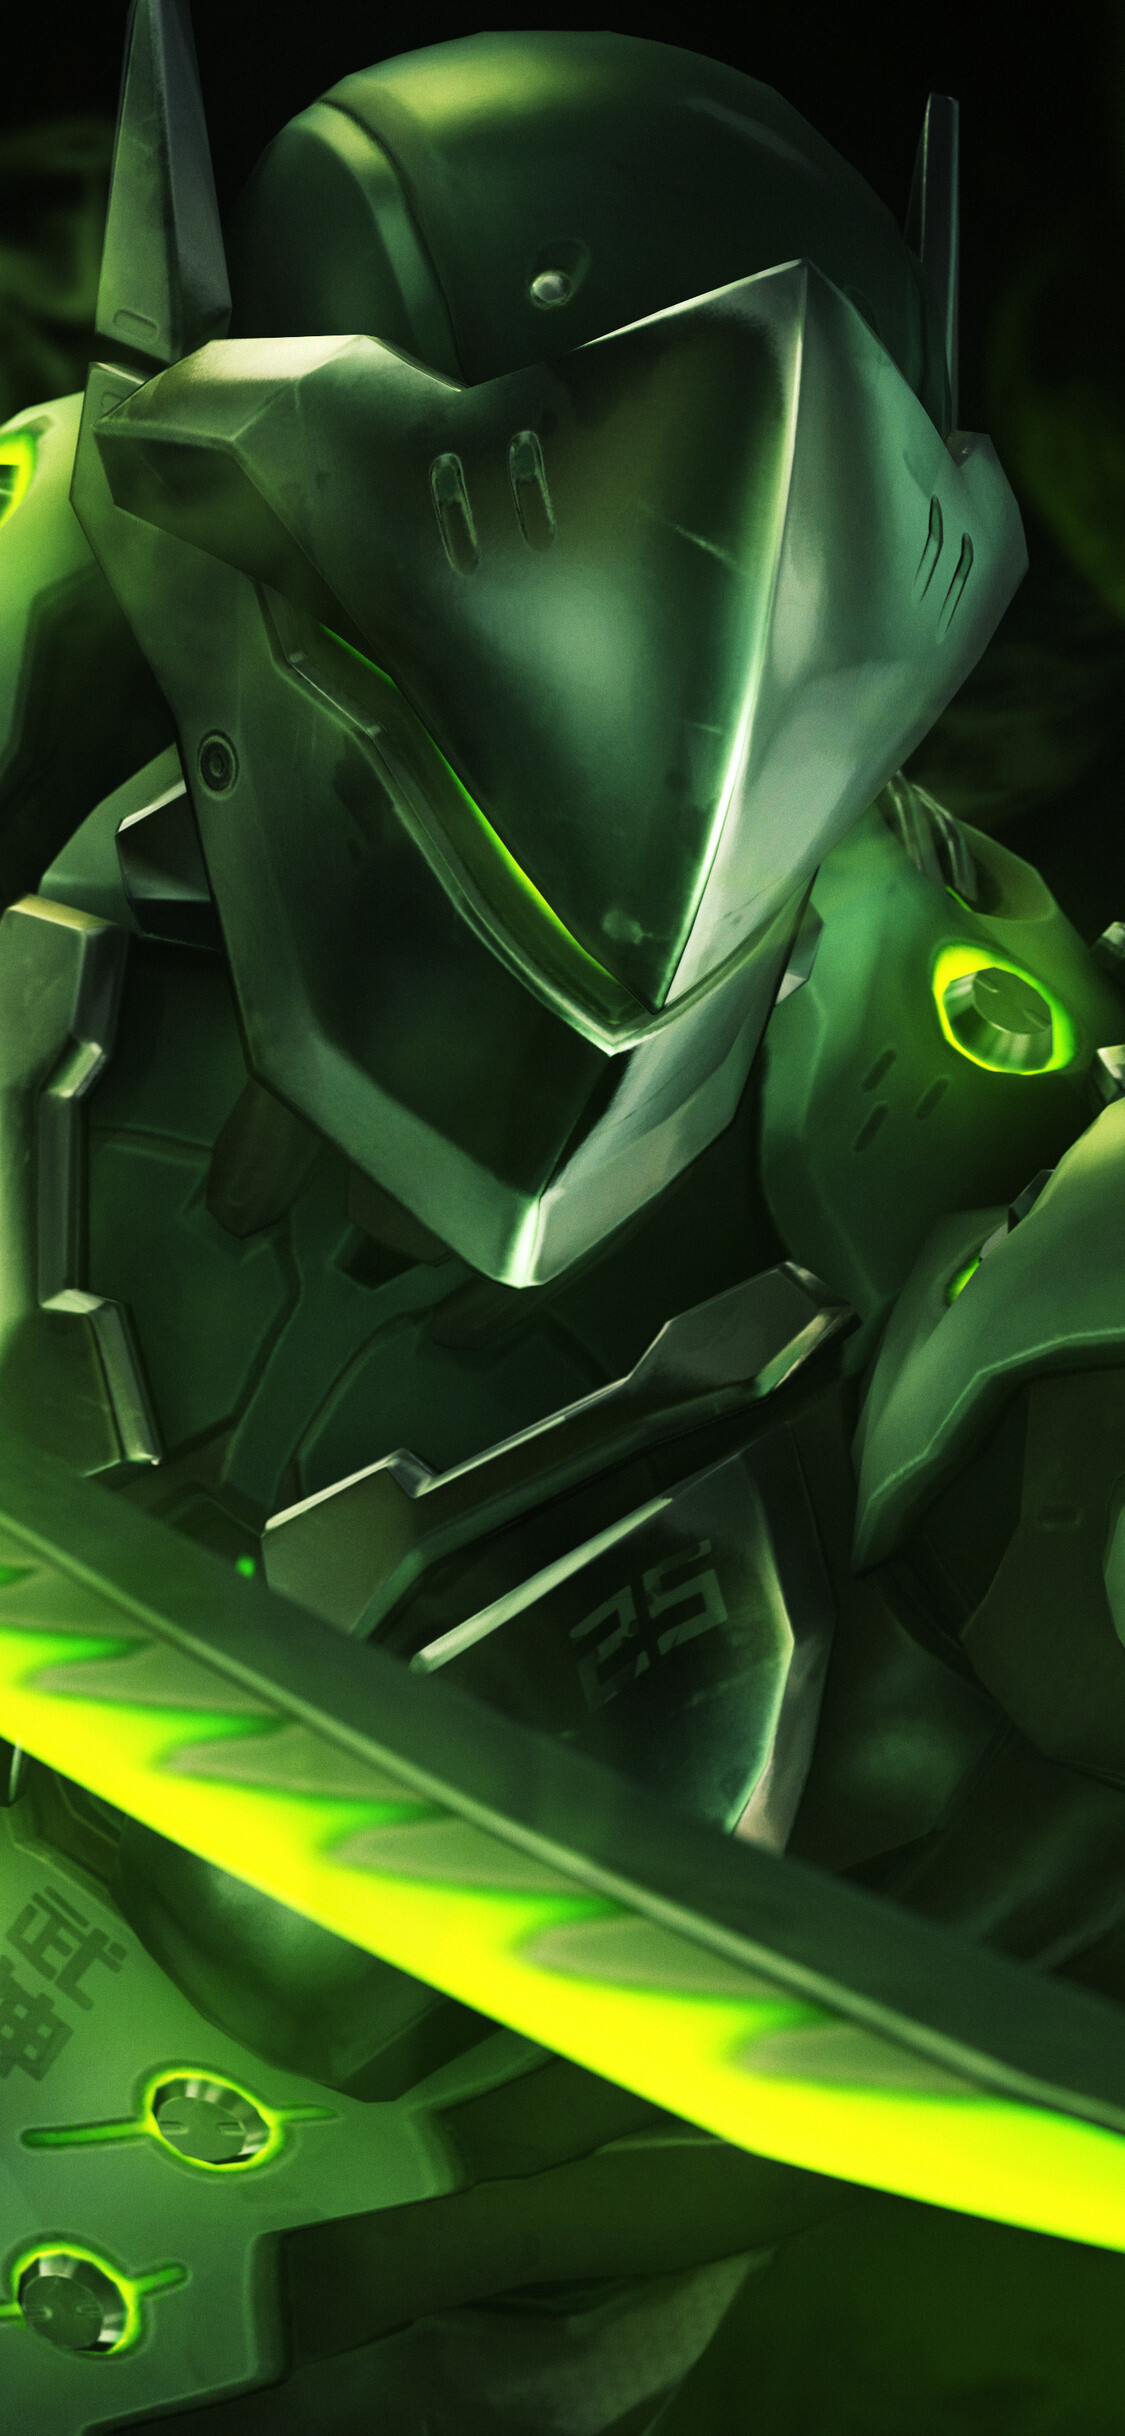 Genji: Overwatch, The fourth playable Overwatch character in Heroes of the Storm. 1130x2440 HD Wallpaper.